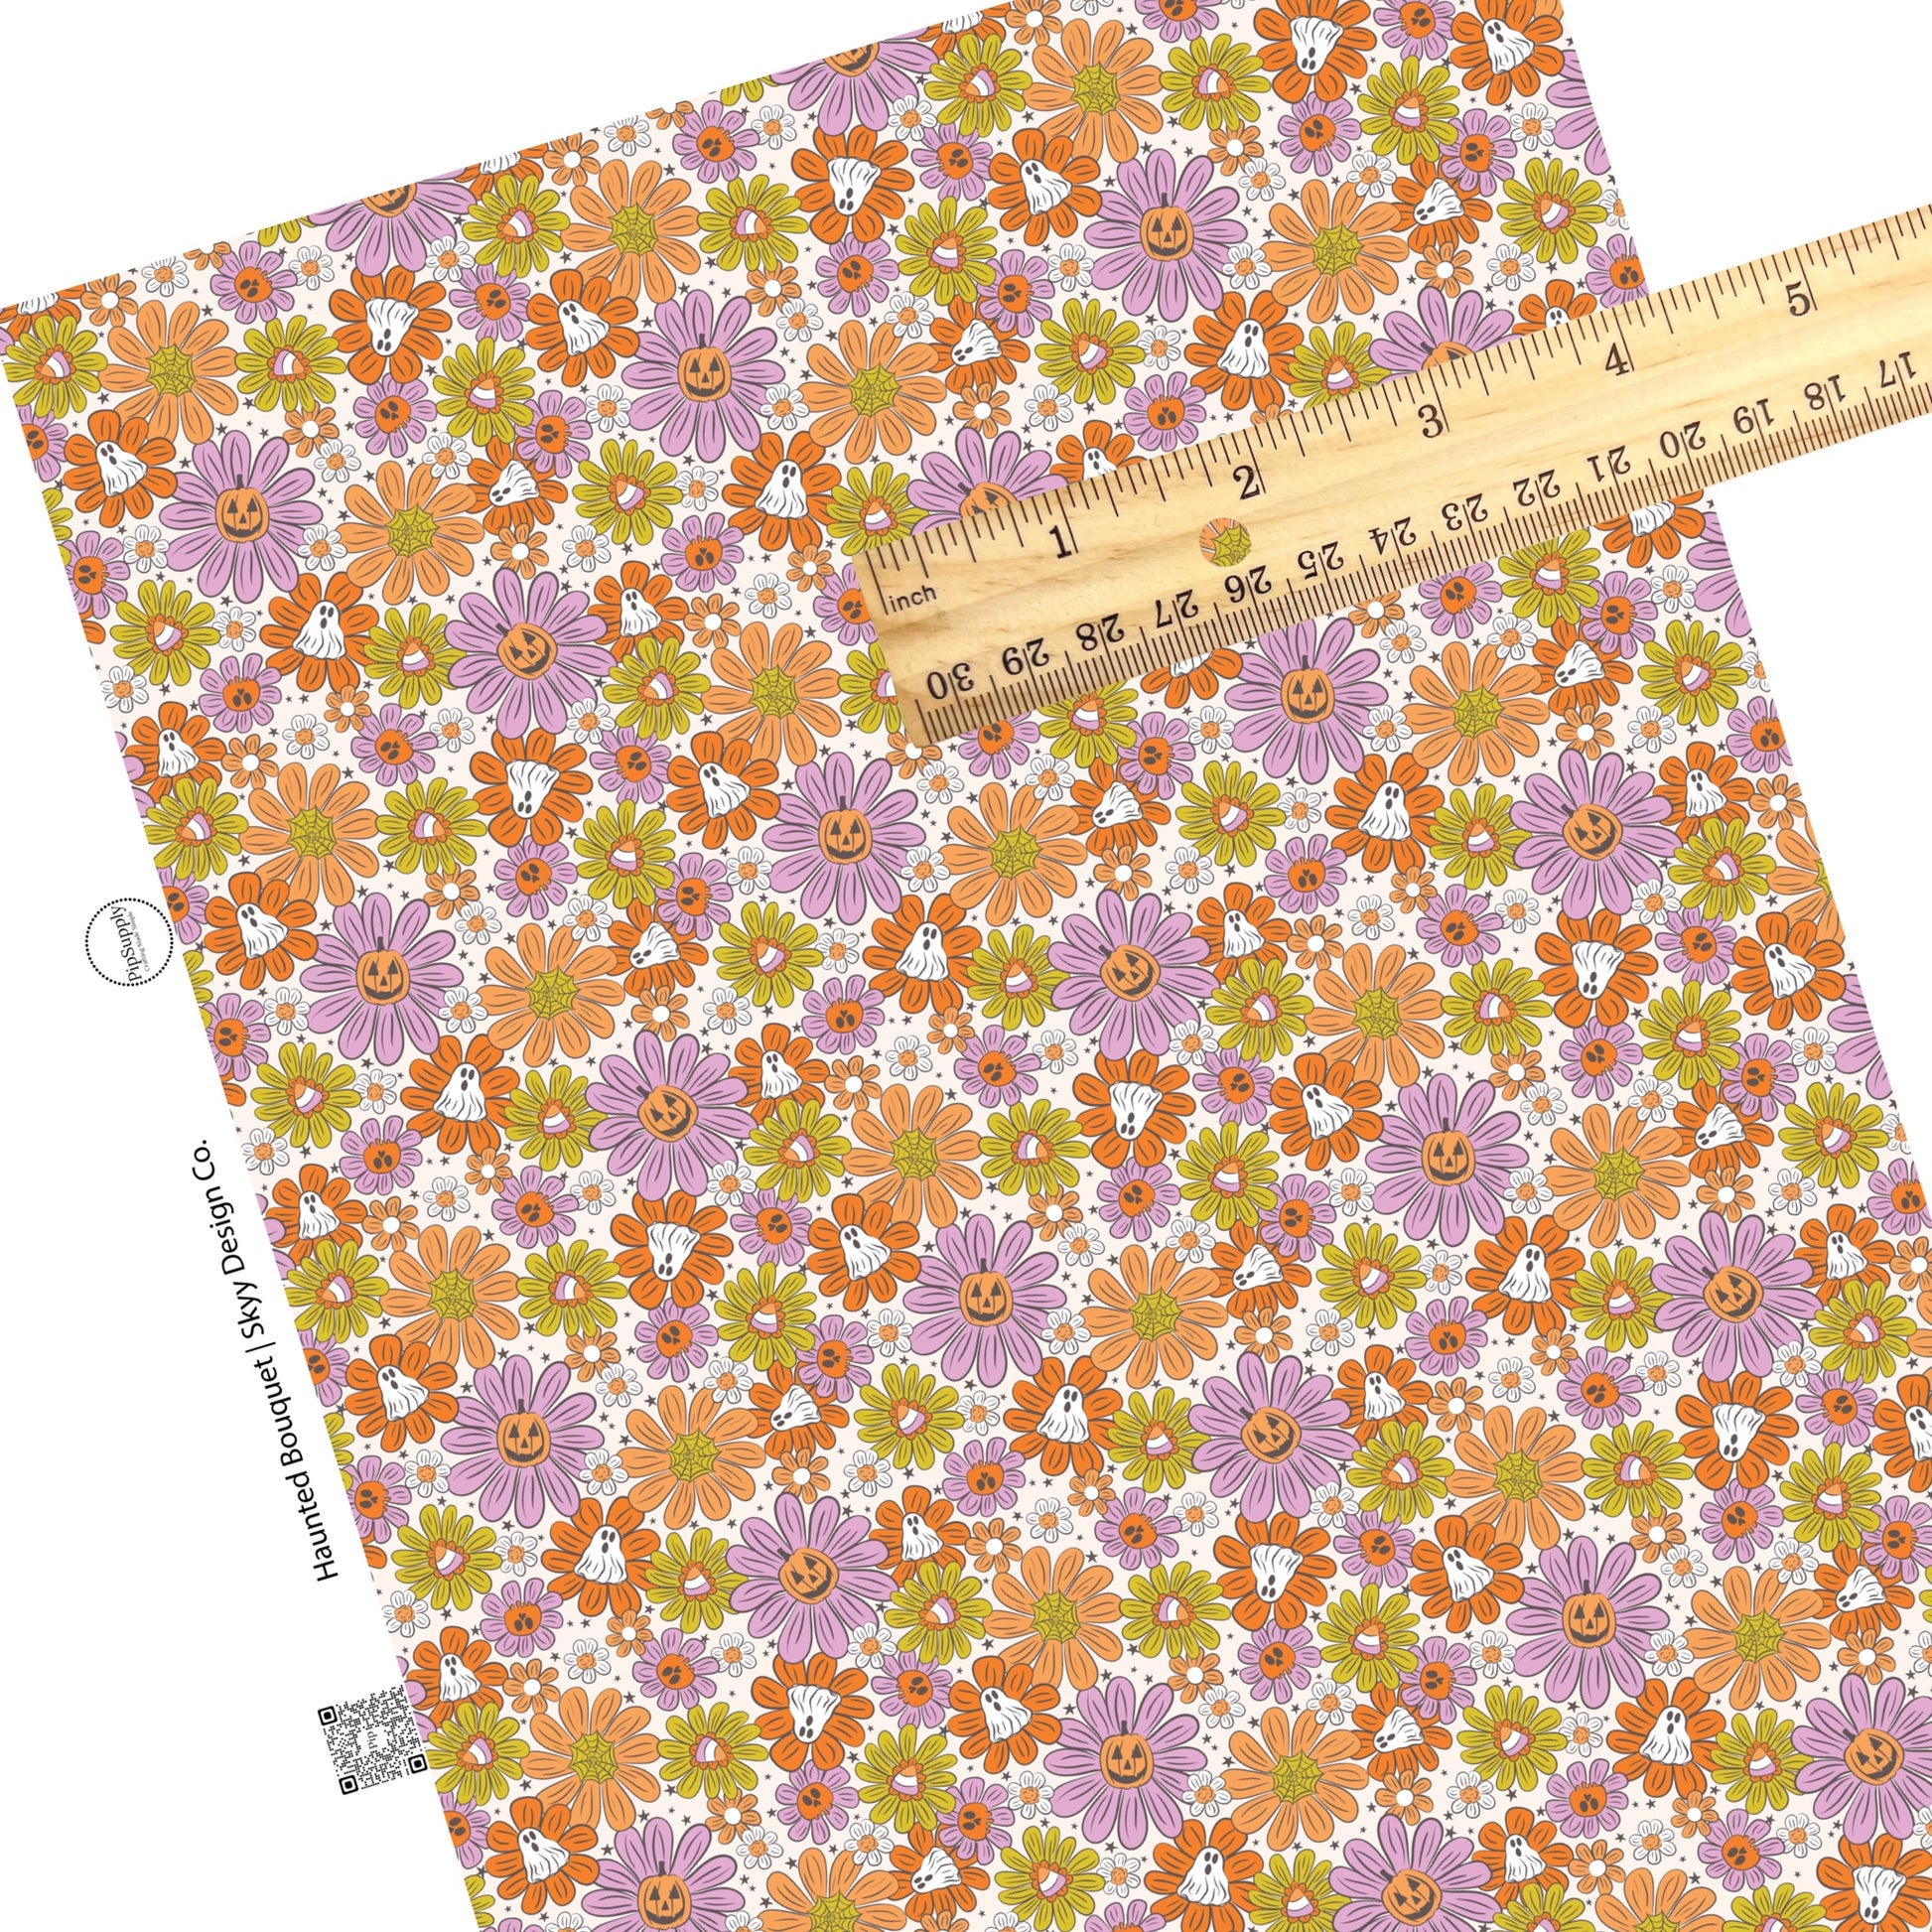 These Halloween themed pink, yellow, and orange faux leather sheets contain the following design elements: small ghost, pumpkins, skulls, and stars on large bright daisies in pink, yellow, and orange. Our CPSIA compliant faux leather sheets or rolls can be used for all types of crafting projects.